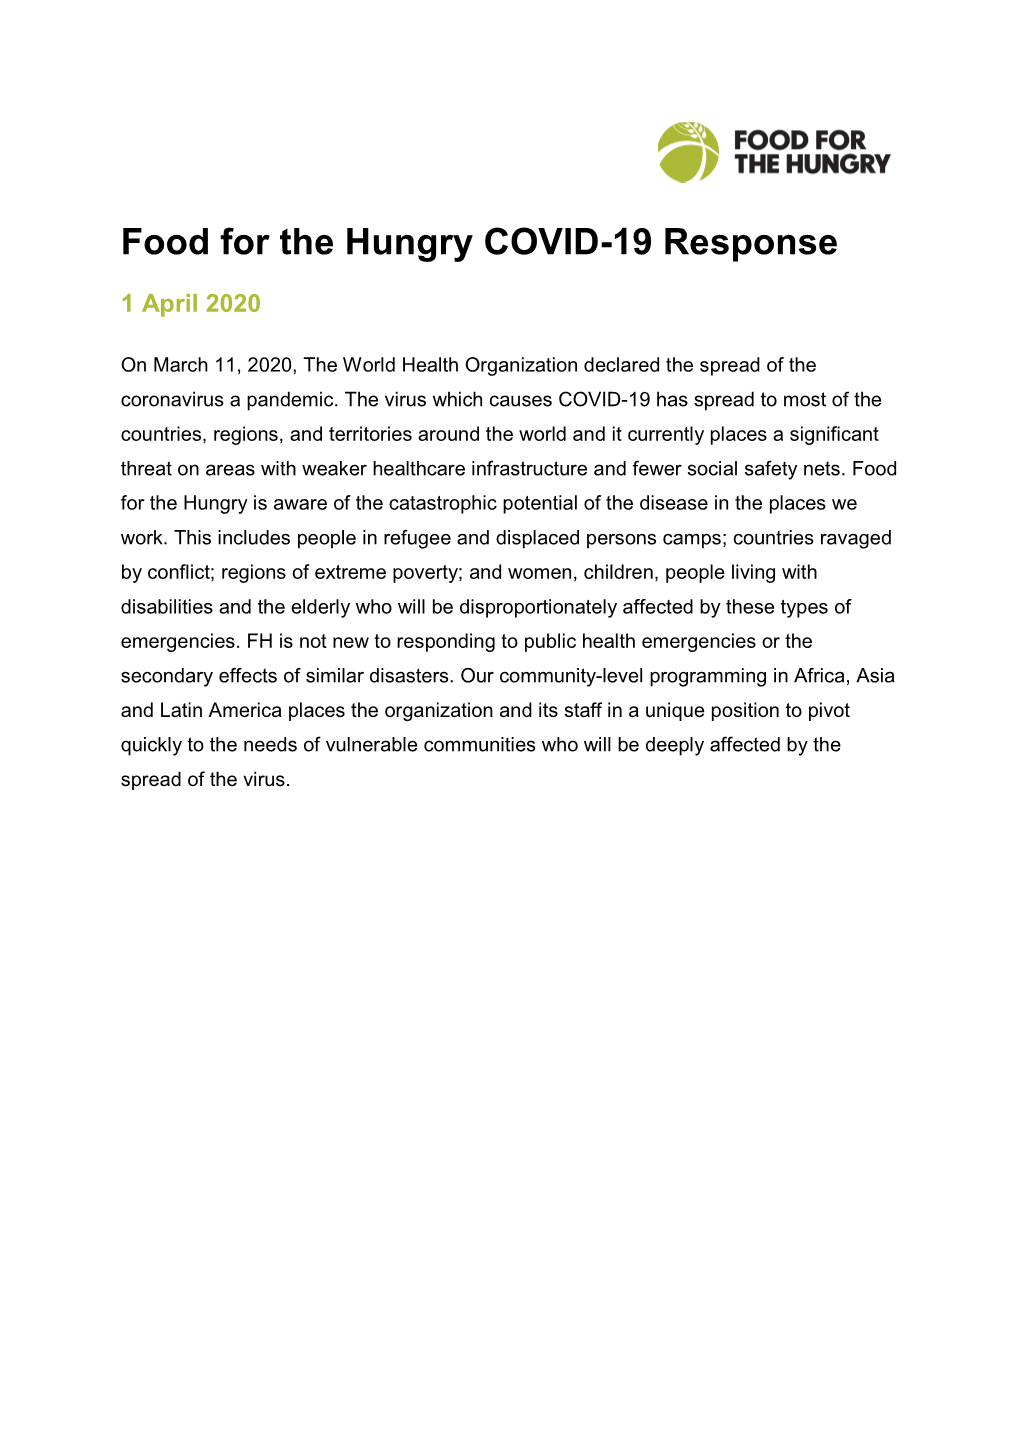 Food for the Hungry COVID-19 Response